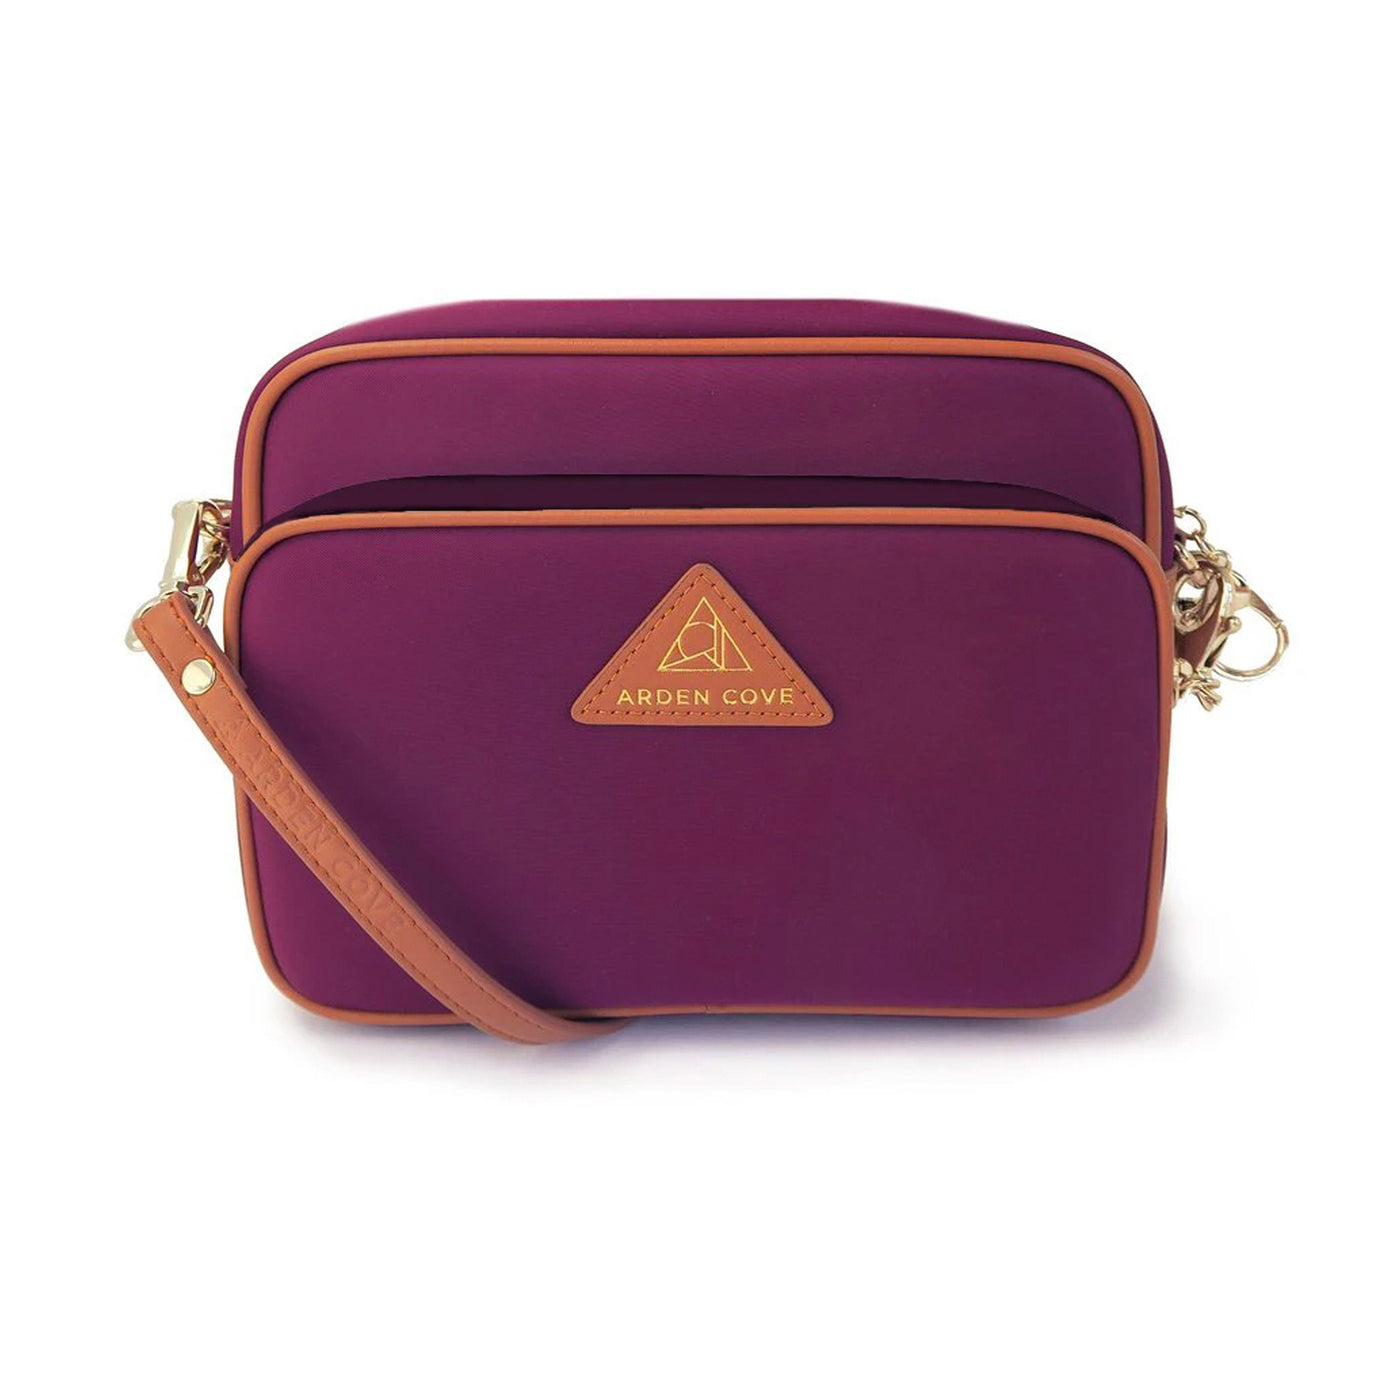 Anti-theft Water-resistant Travel Crossbody - Crissy Full Crossbody in Maroon Gold with slash-resistant faux leather & classic clasps straps - front view - Arden Cove